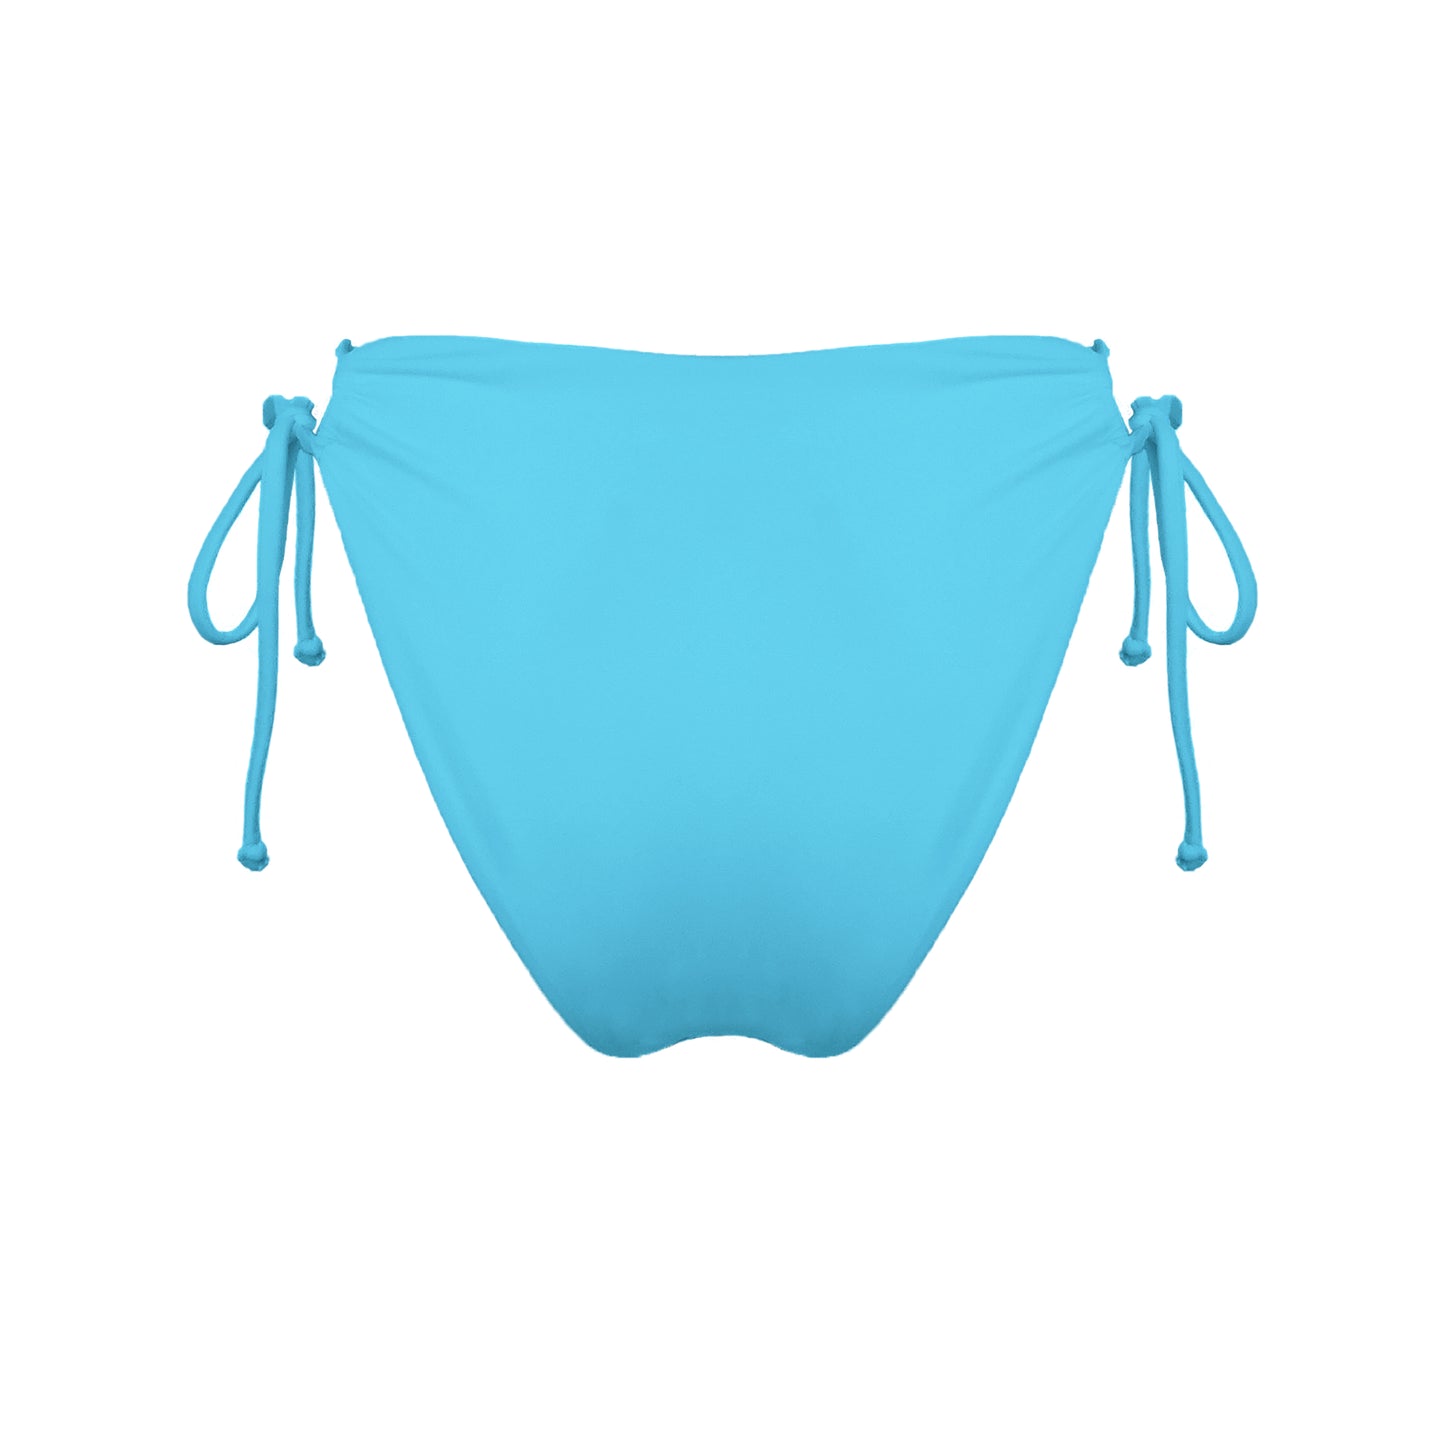 Back view of acqua blue strappy mid-rise bikini bottoms with high cut legs and cheeky coverage.